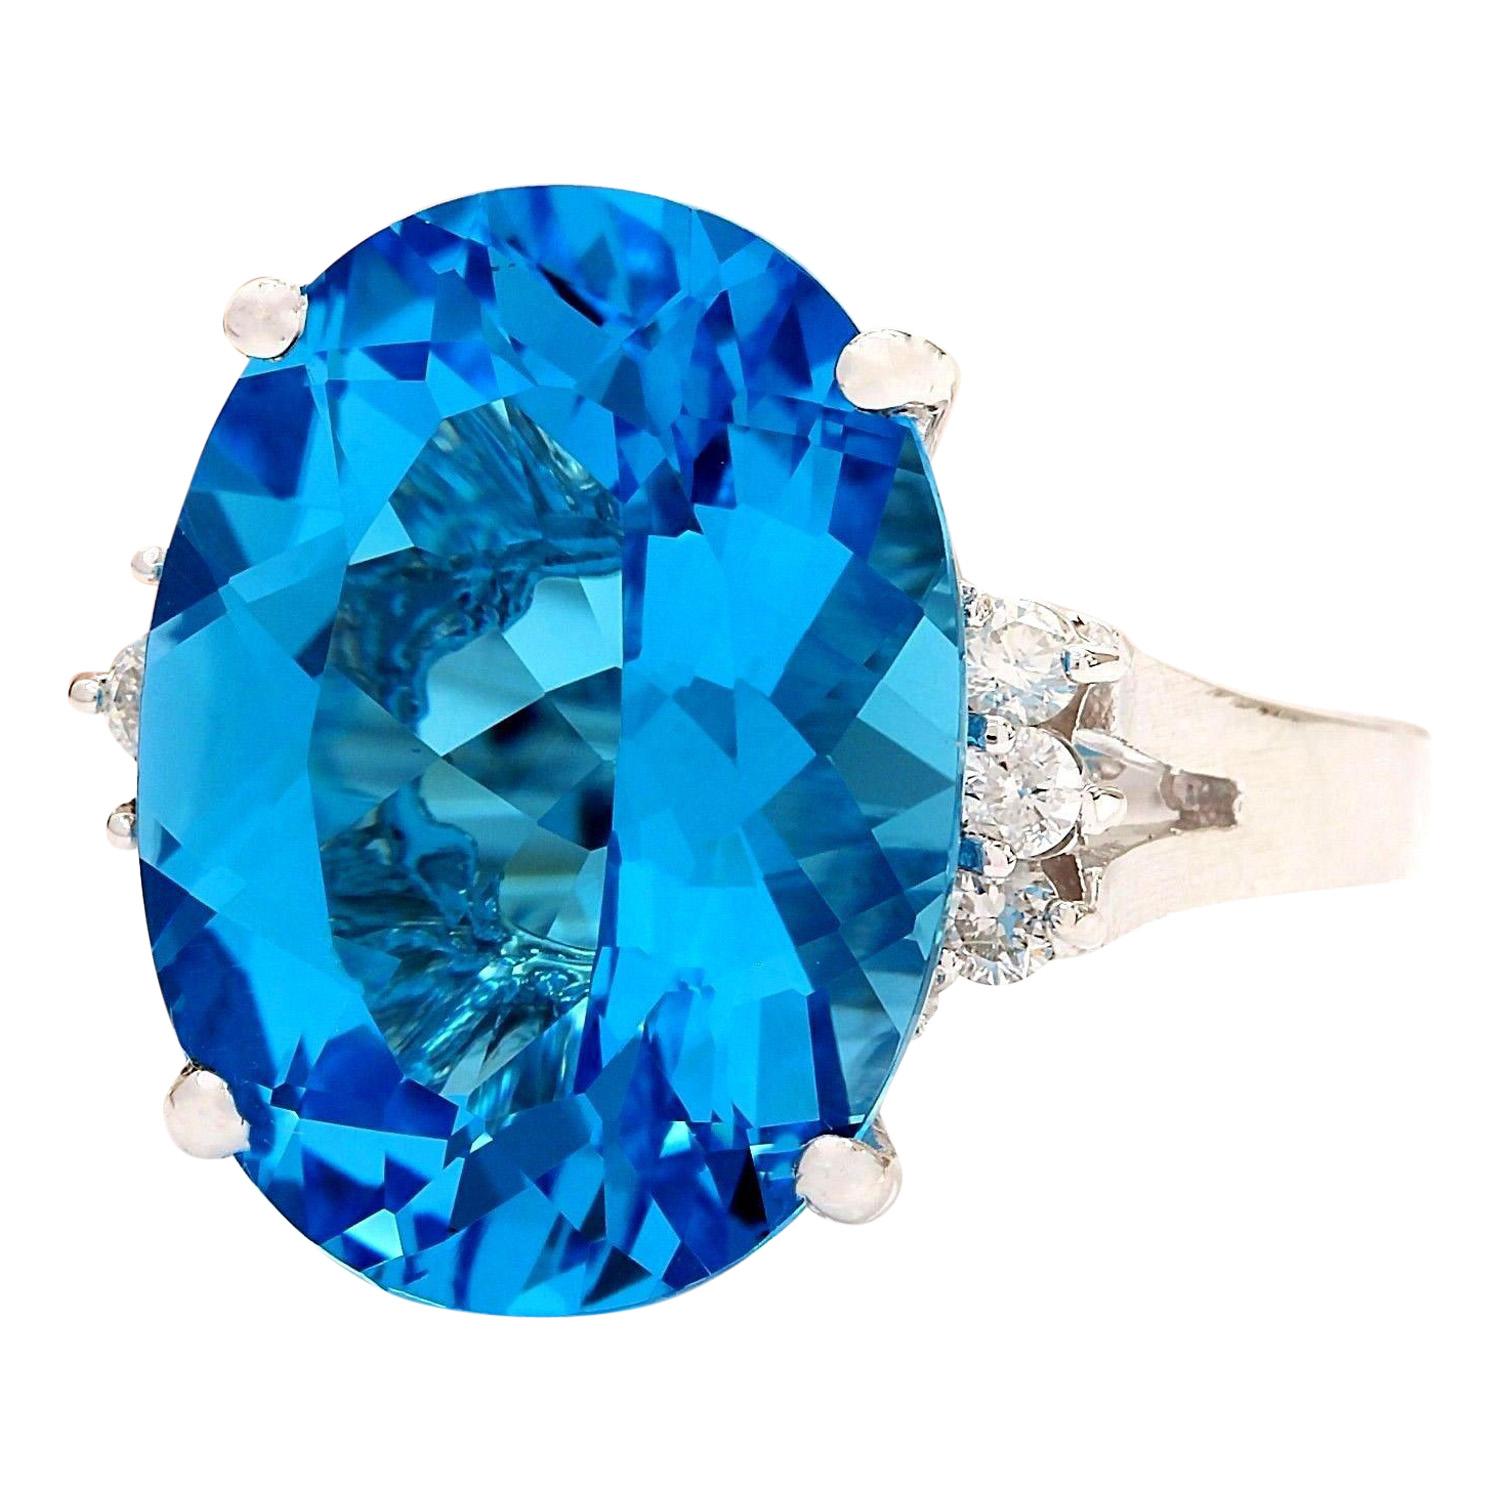 18.50 Carat Natural Topaz 14K Solid White Gold Diamond Ring
 Item Type: Ring
 Item Style: Cocktail
 Material: 14K White Gold
 Mainstone: Topaz
 Stone Color: Blue
 Stone Weight: 18.20 Carat
 Stone Shape: Oval
 Stone Quantity: 1
 Stone Dimensions: